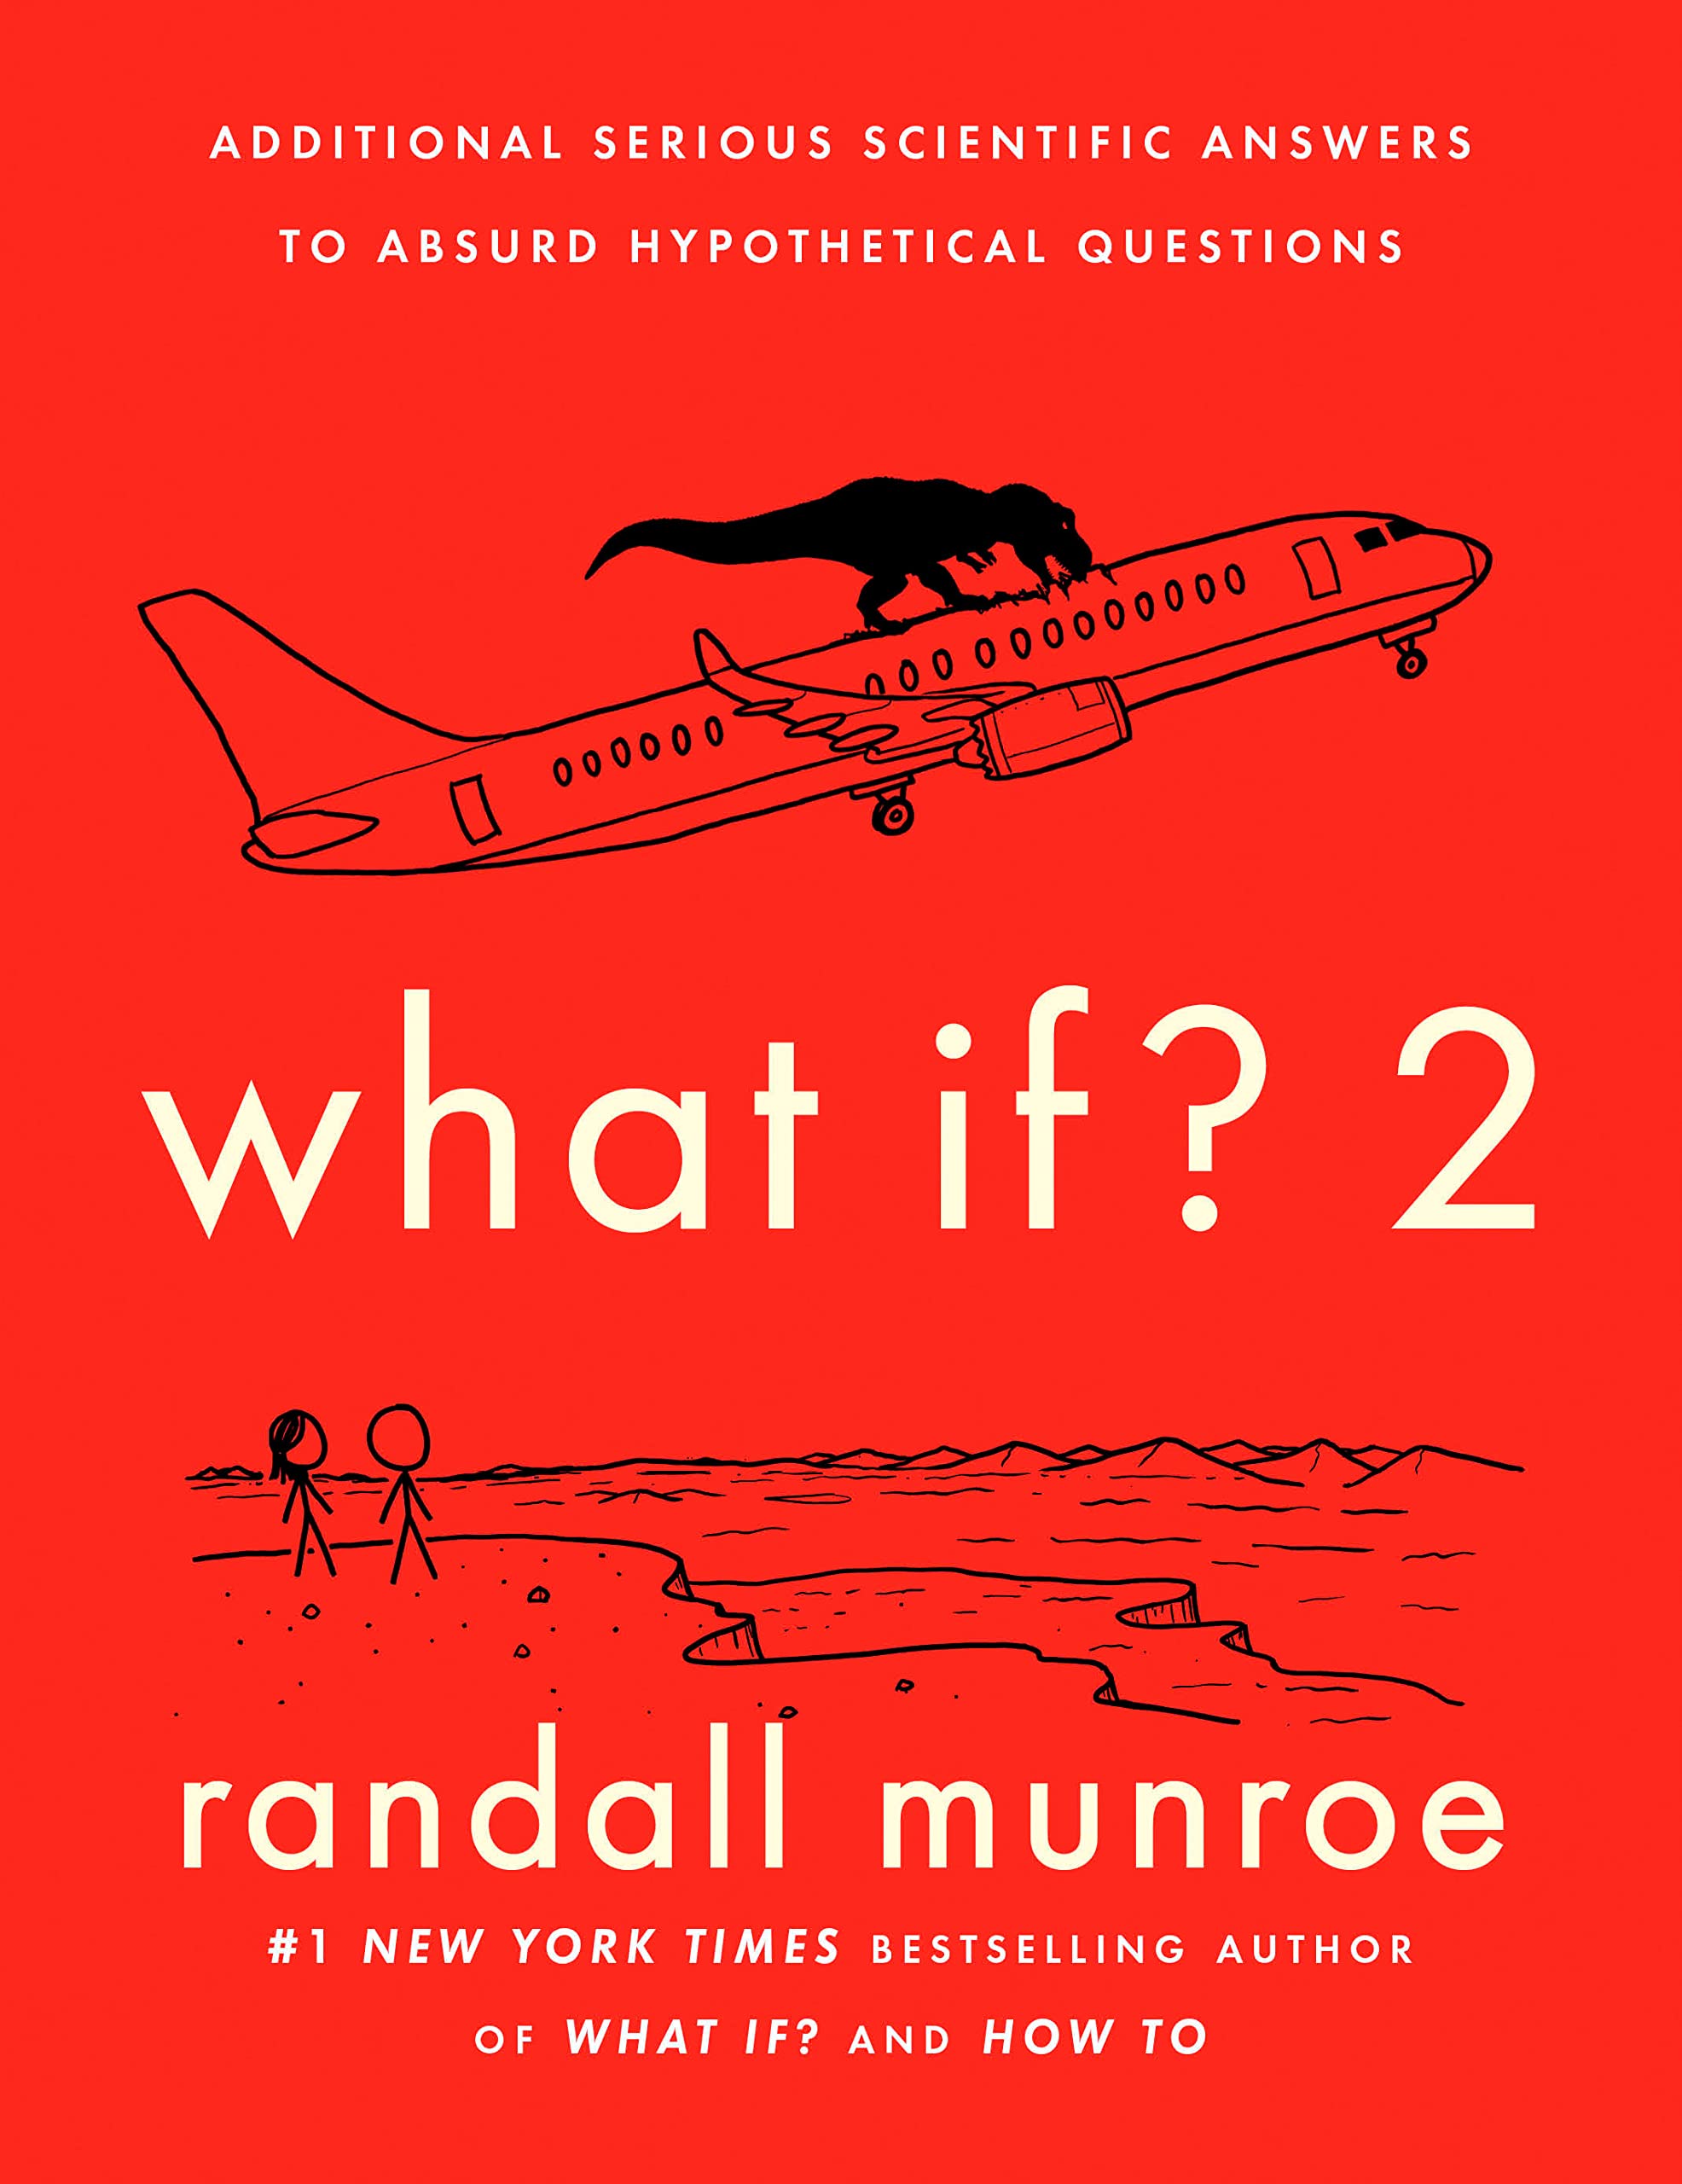 What If? 2: Additional Serious Scientific Answers to Absurd Hypothetical Questions (Hardcover)